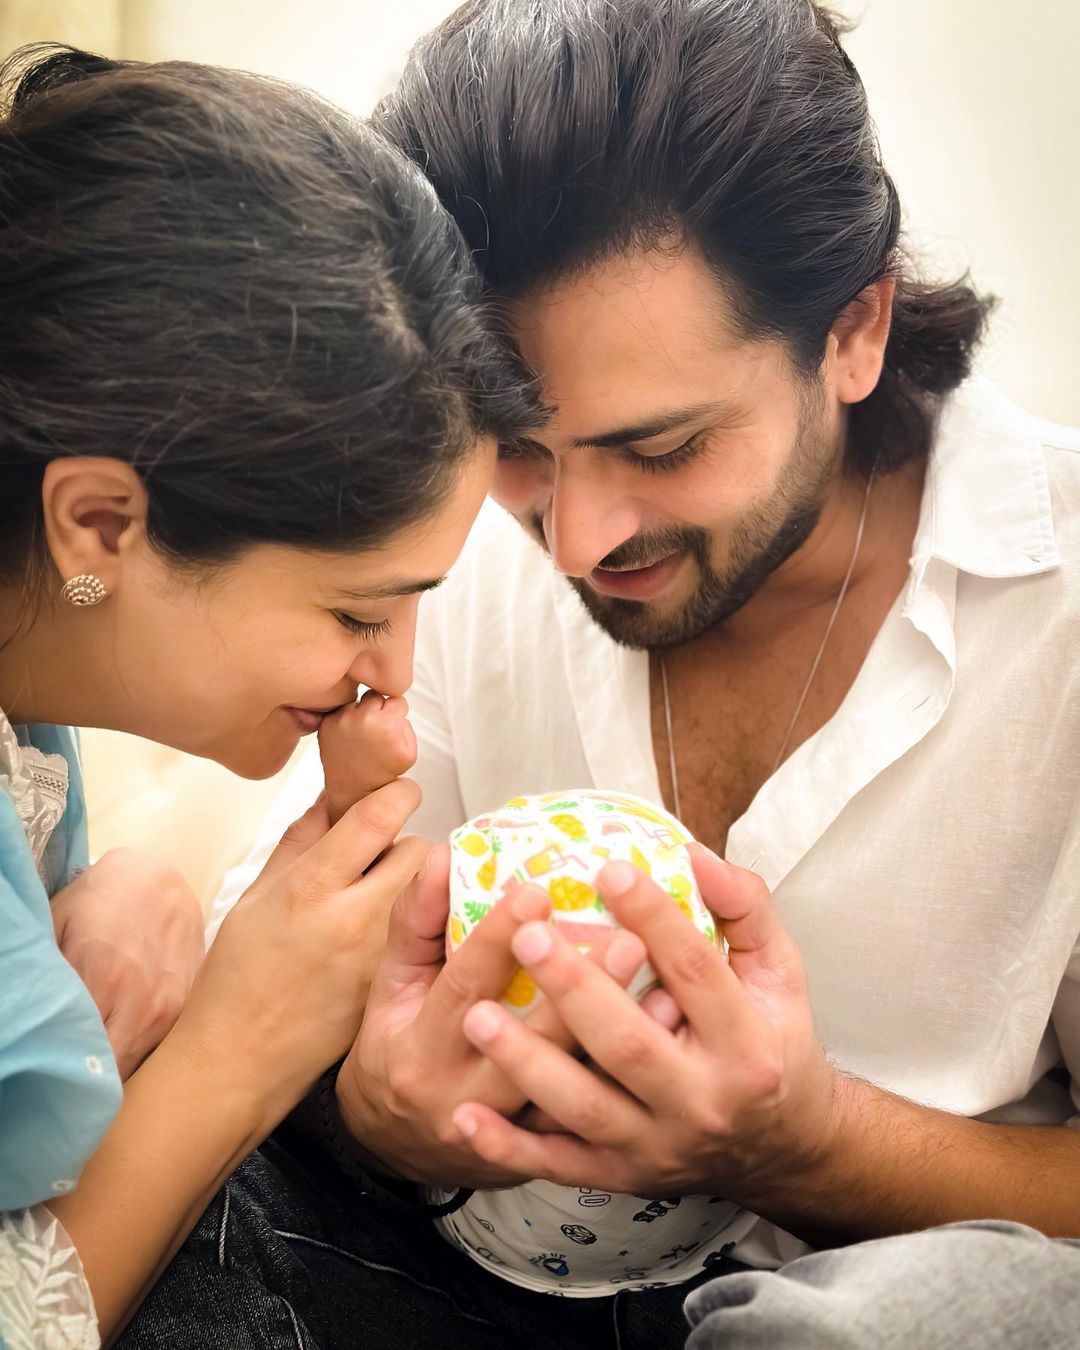 Exclusive - Shoaib Ibrahim’s Grandma Meets ‘Ruhaan’ For The First Time And Gifts Silver Utensils!